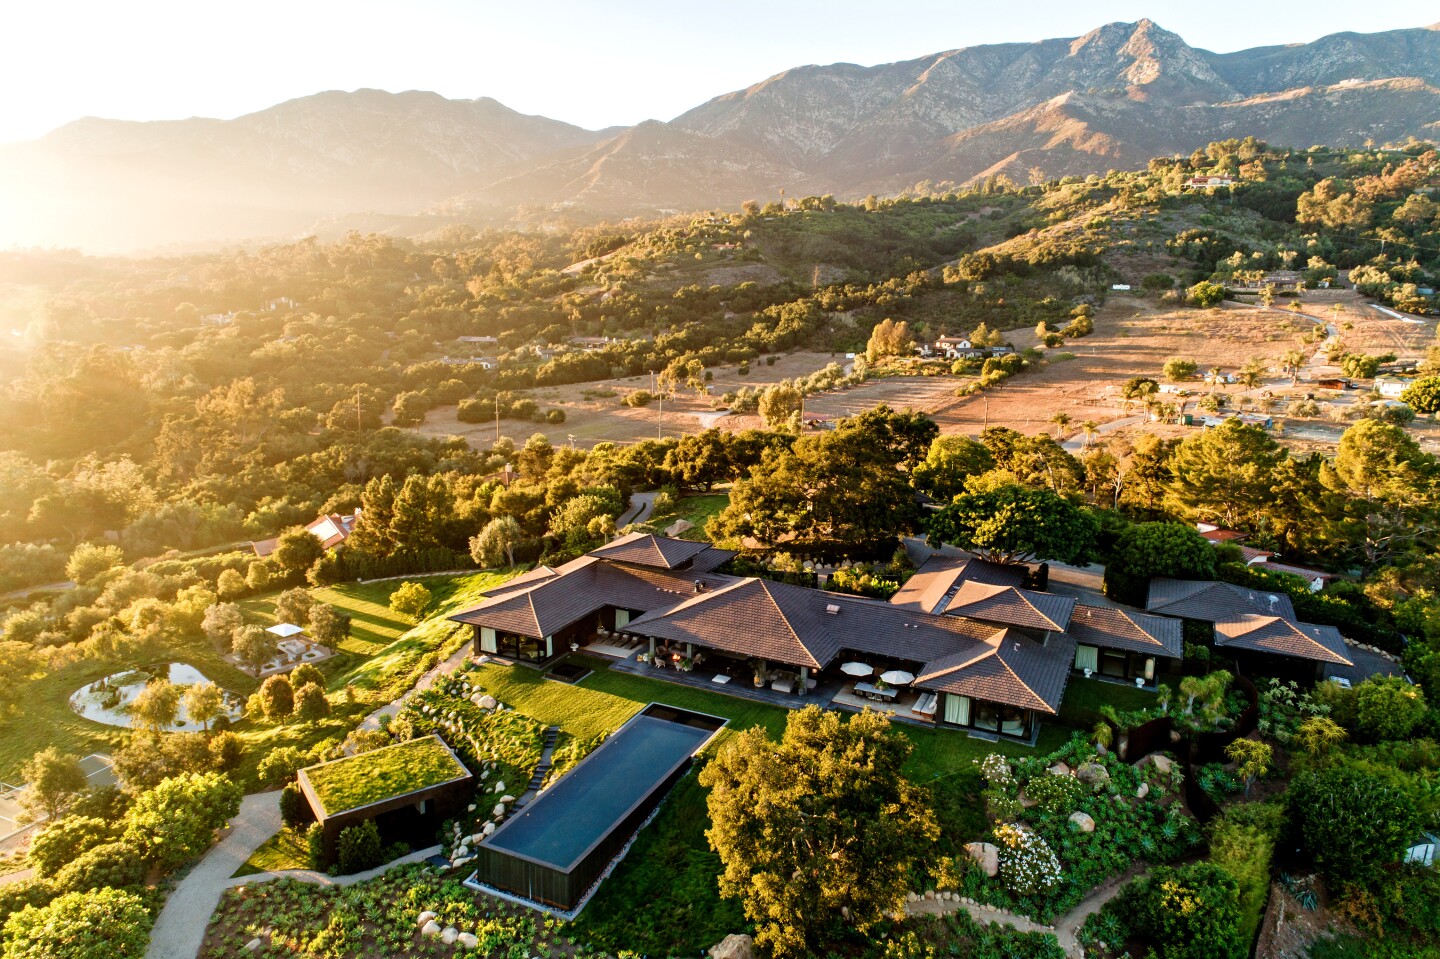 Set against a dramatic backdrop of mountains, the Bali-inspired estate features multiple houses and high-end amenities across nine acres.